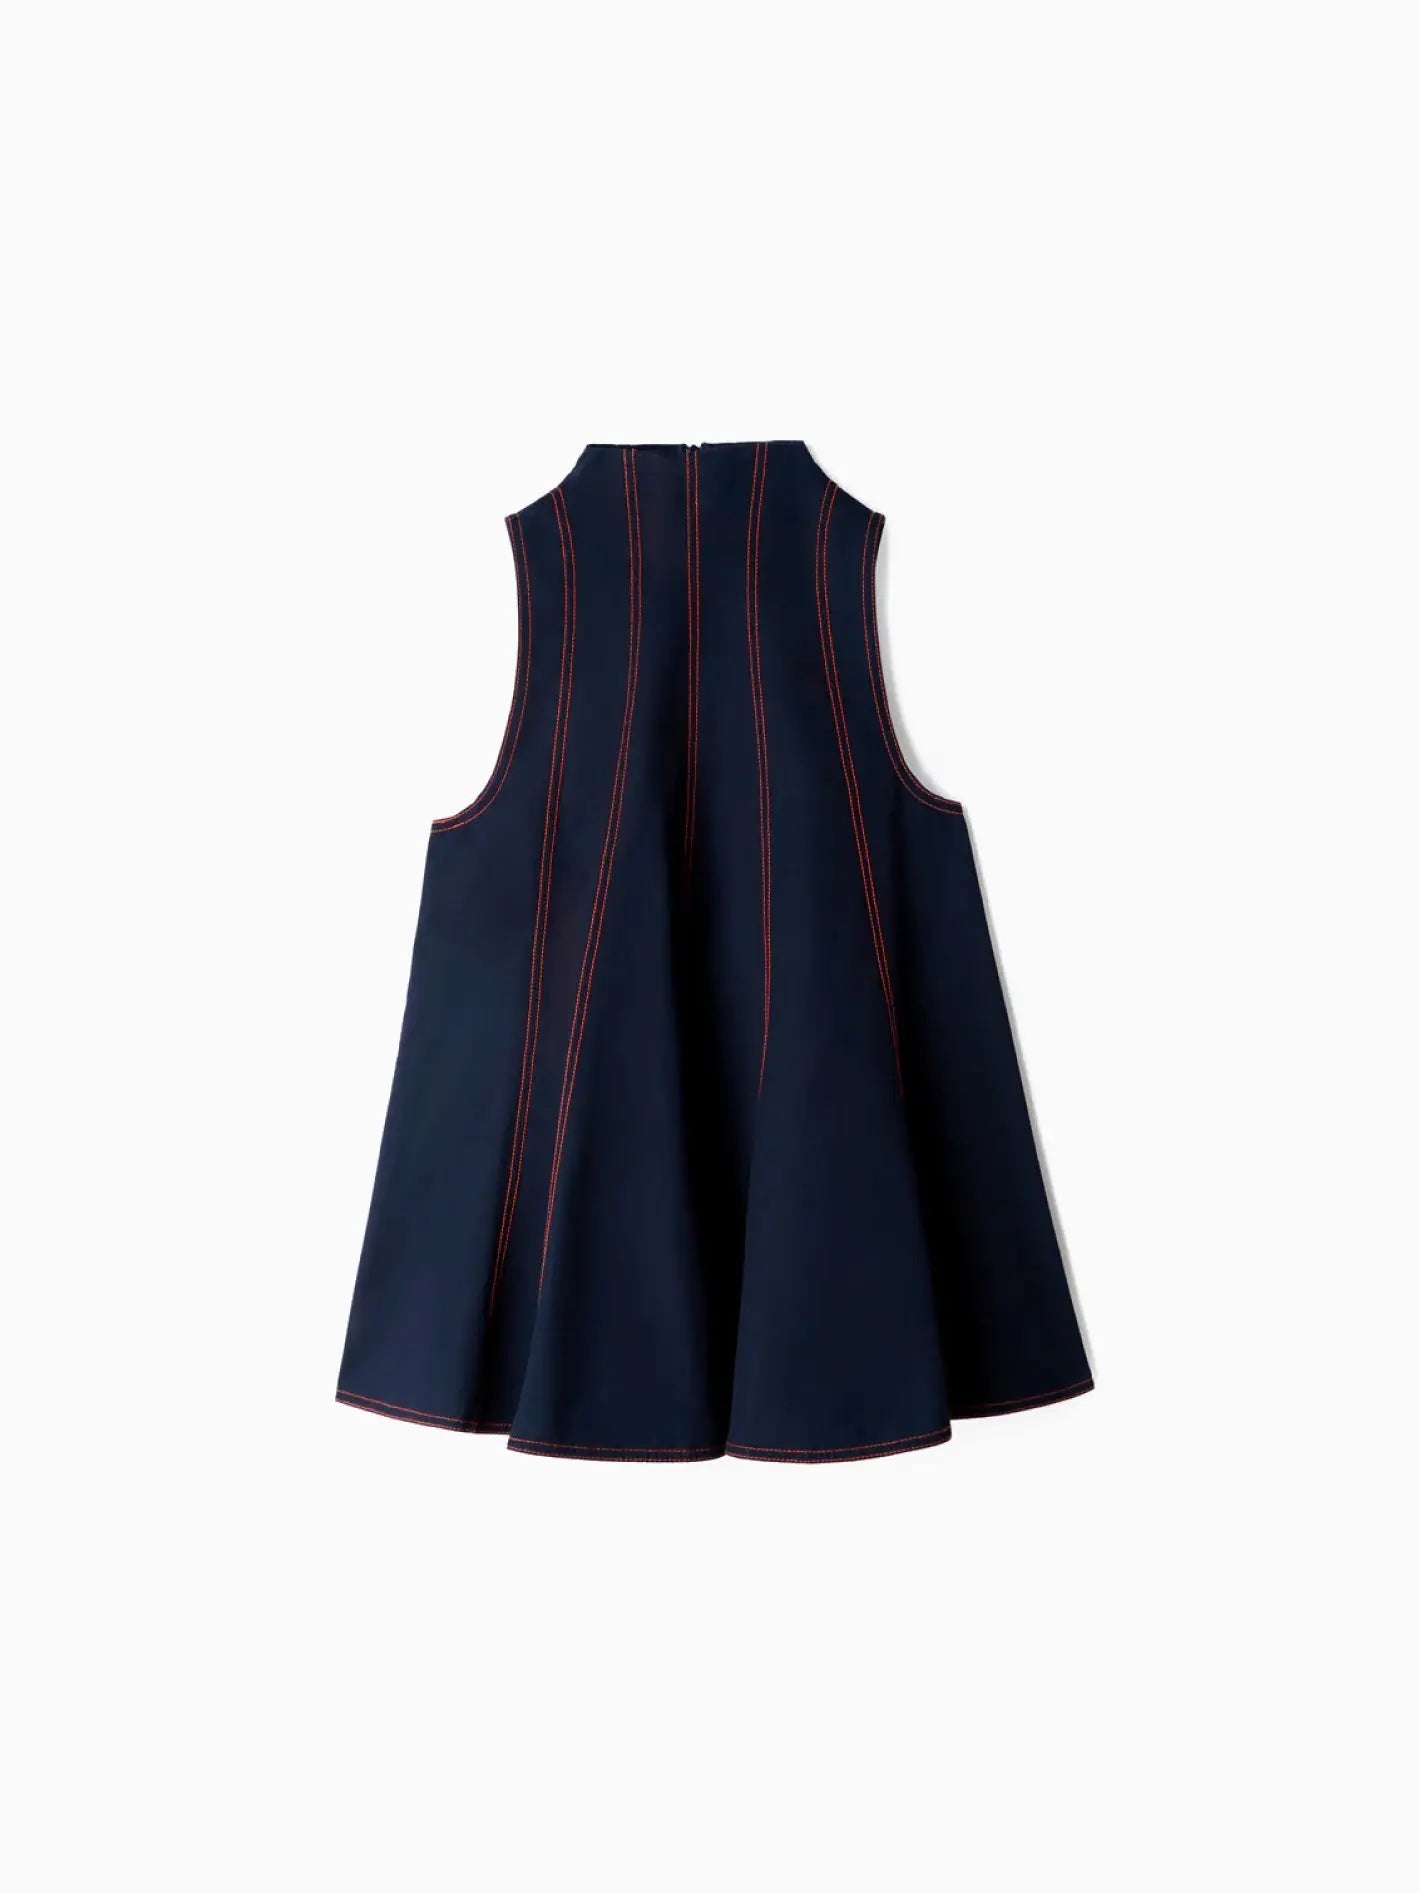 A sleeveless, navy blue Tulipano Top from Sunnei with red vertical stitching lines from the neckline to the hem. The top has a flared, A-line silhouette and is photographed against a plain white background. This stylish piece embodies the chic fashion of Barcelona.